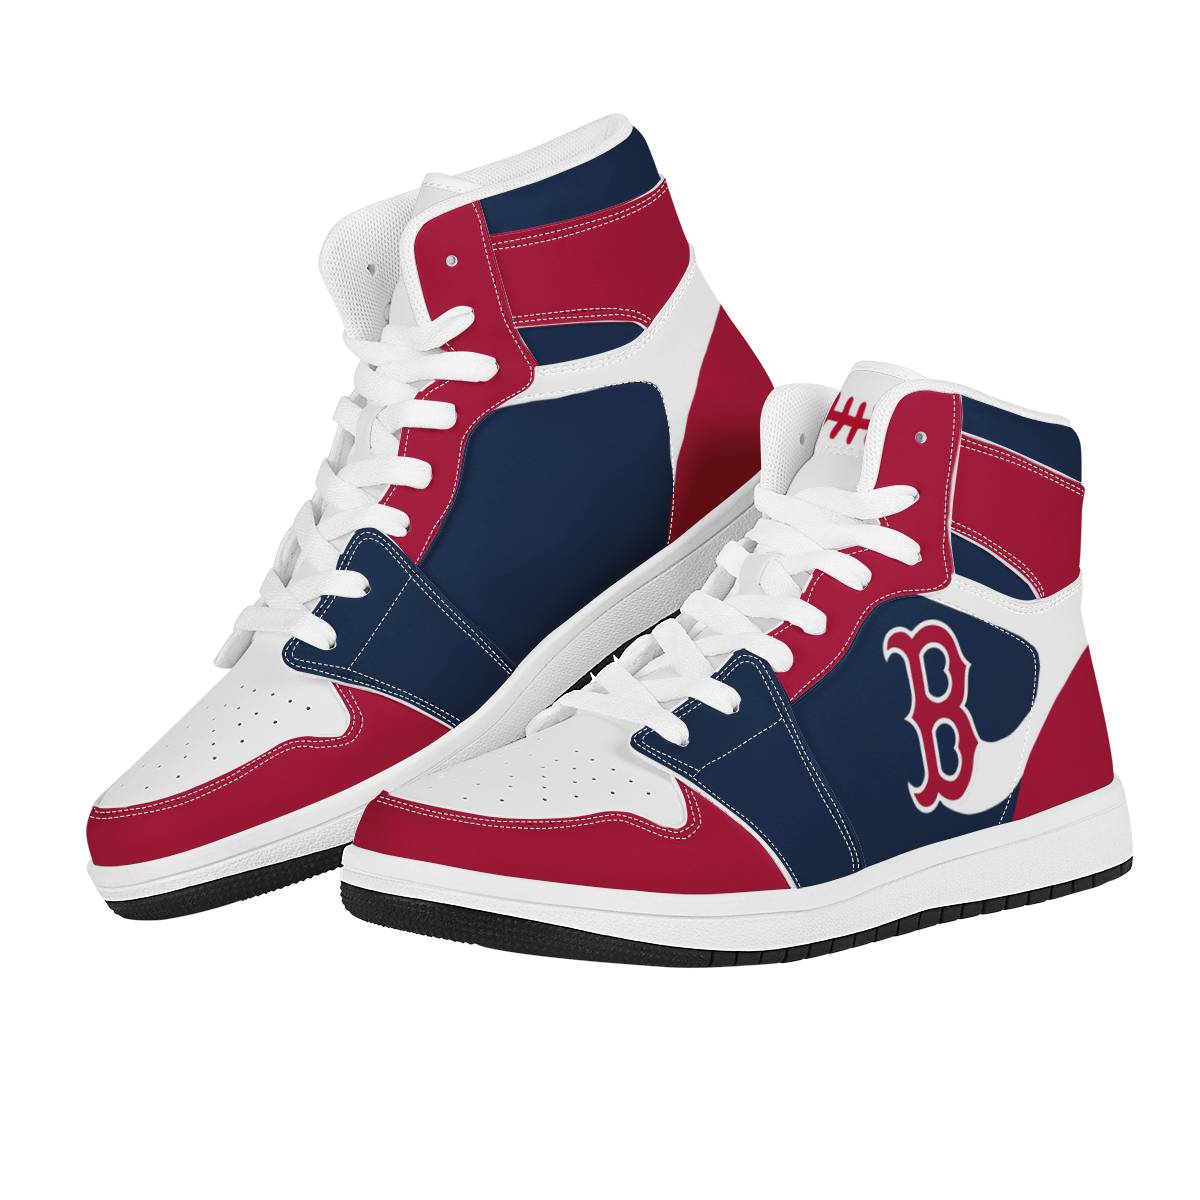 Men's Boston Red Sox High Top Leather AJ1 Sneakers 002